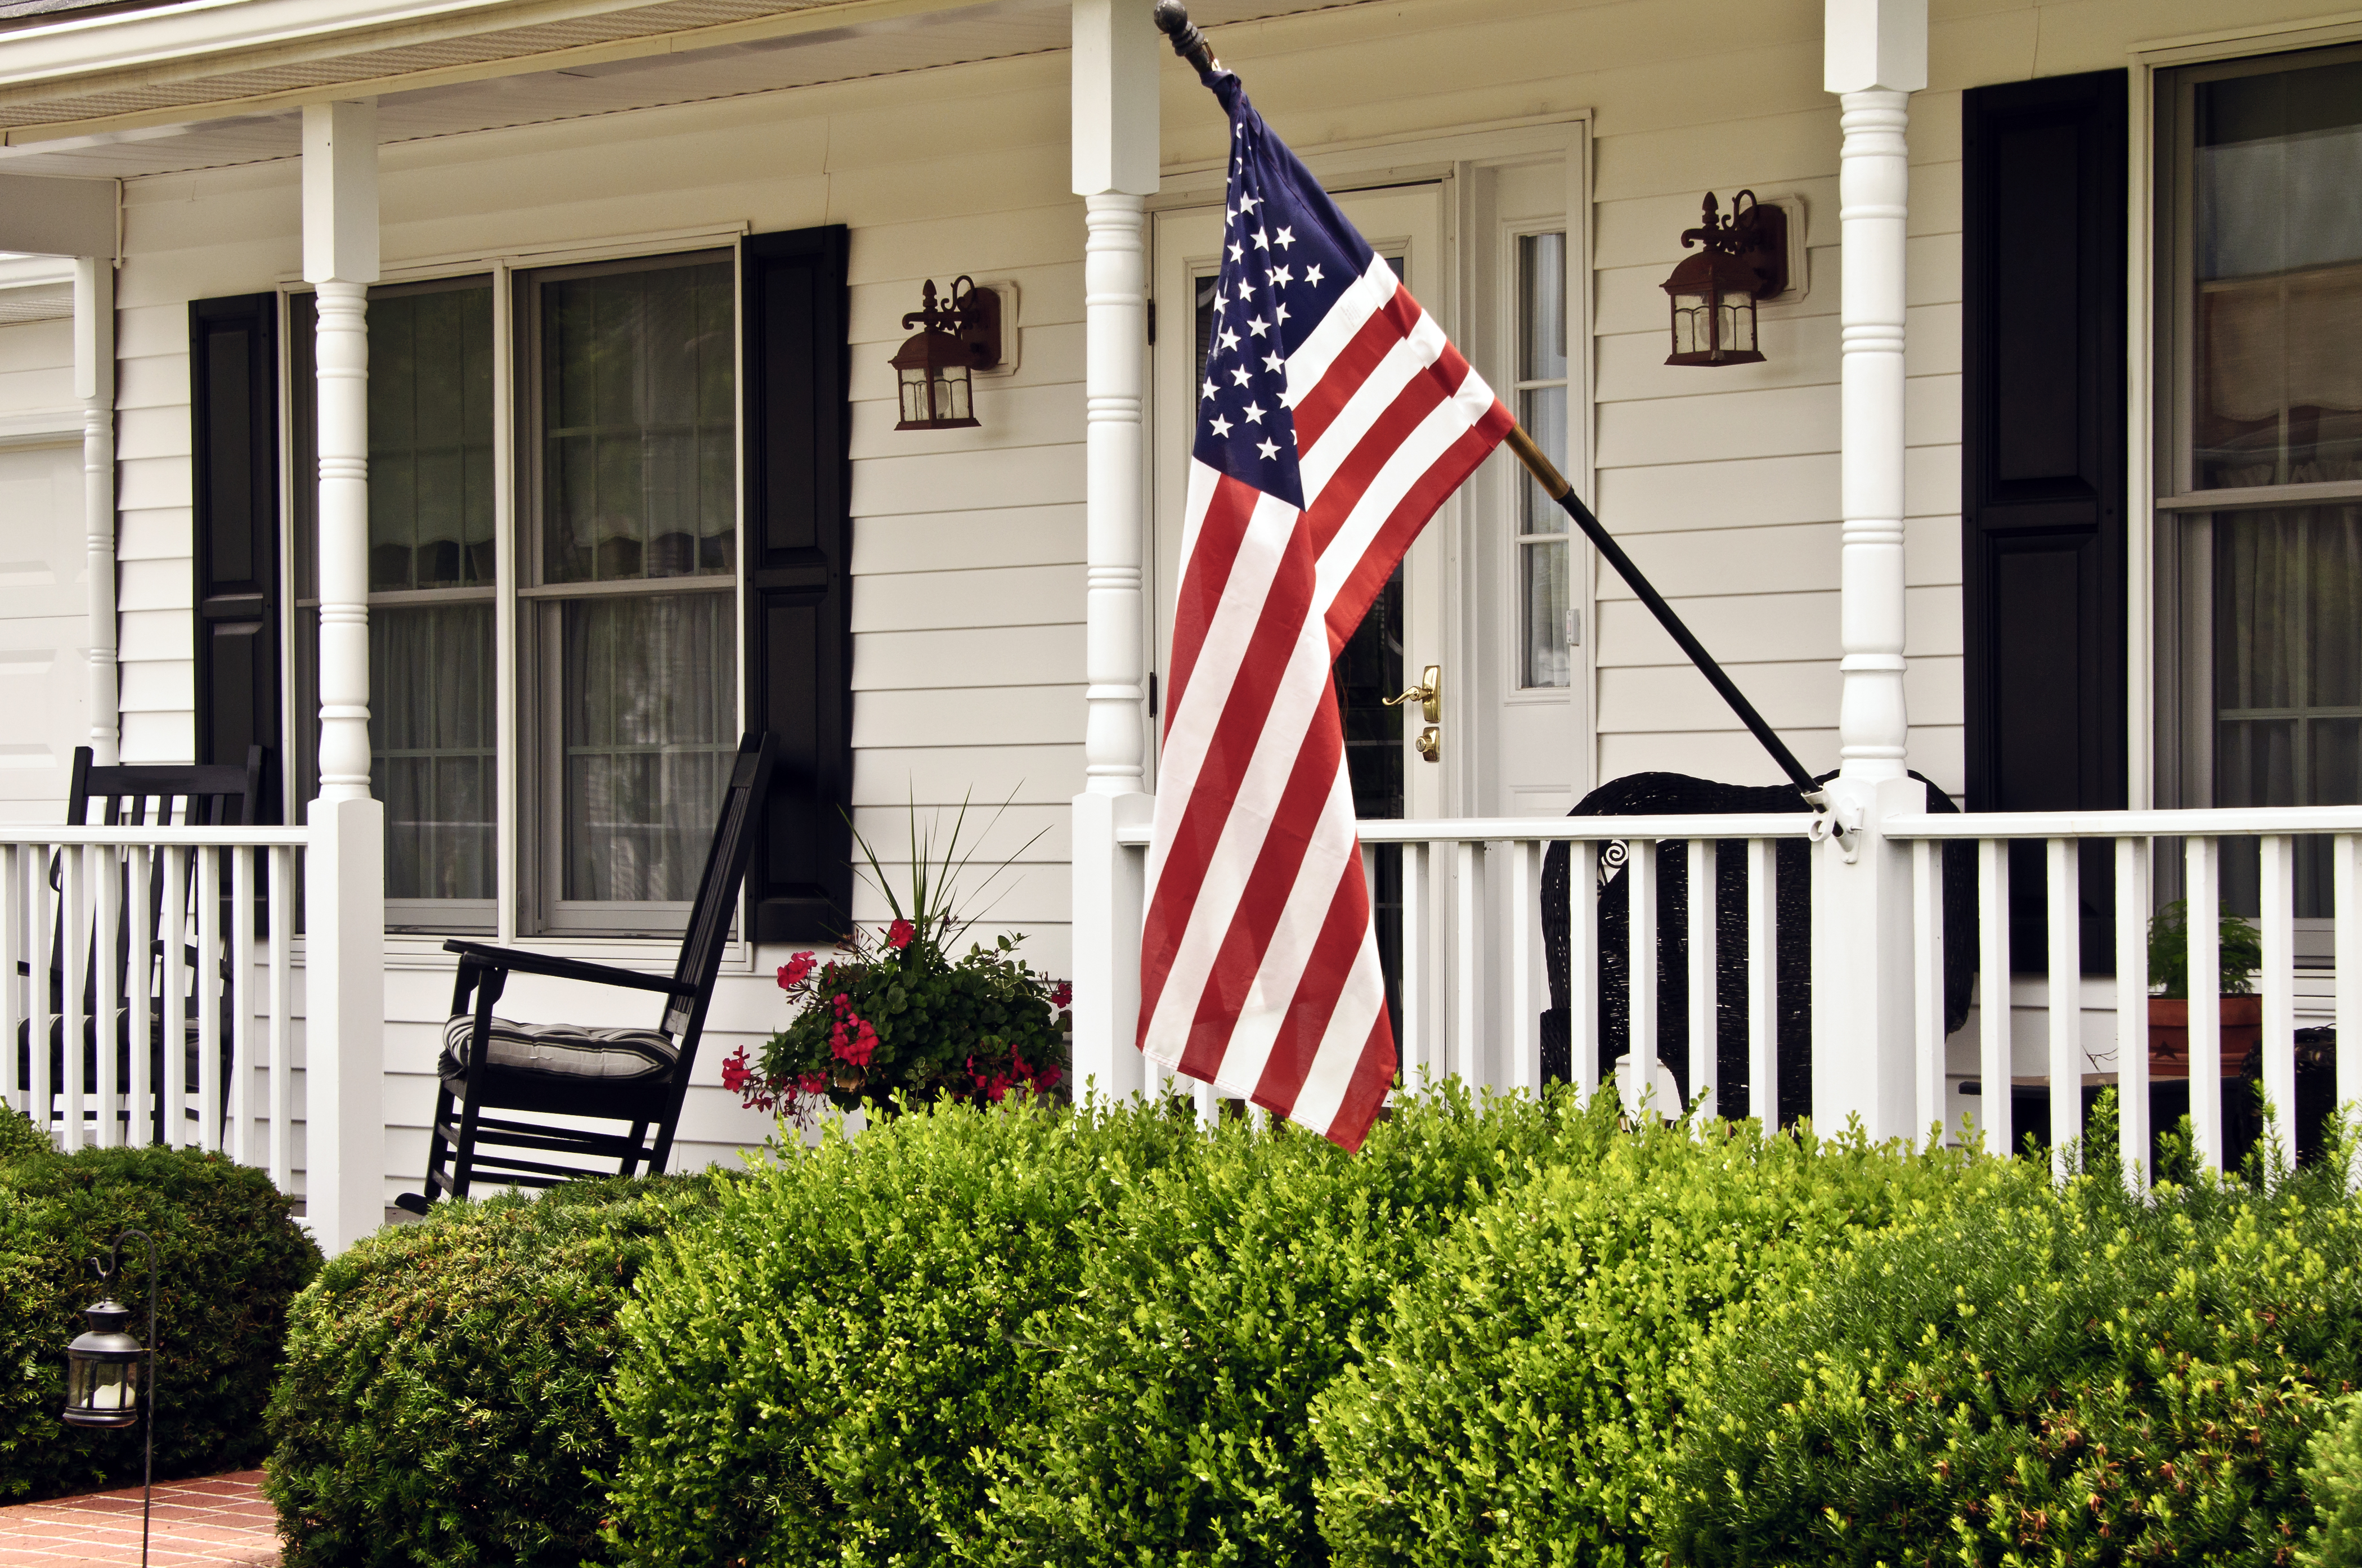 A house with an American flag | Source: Shutterstock